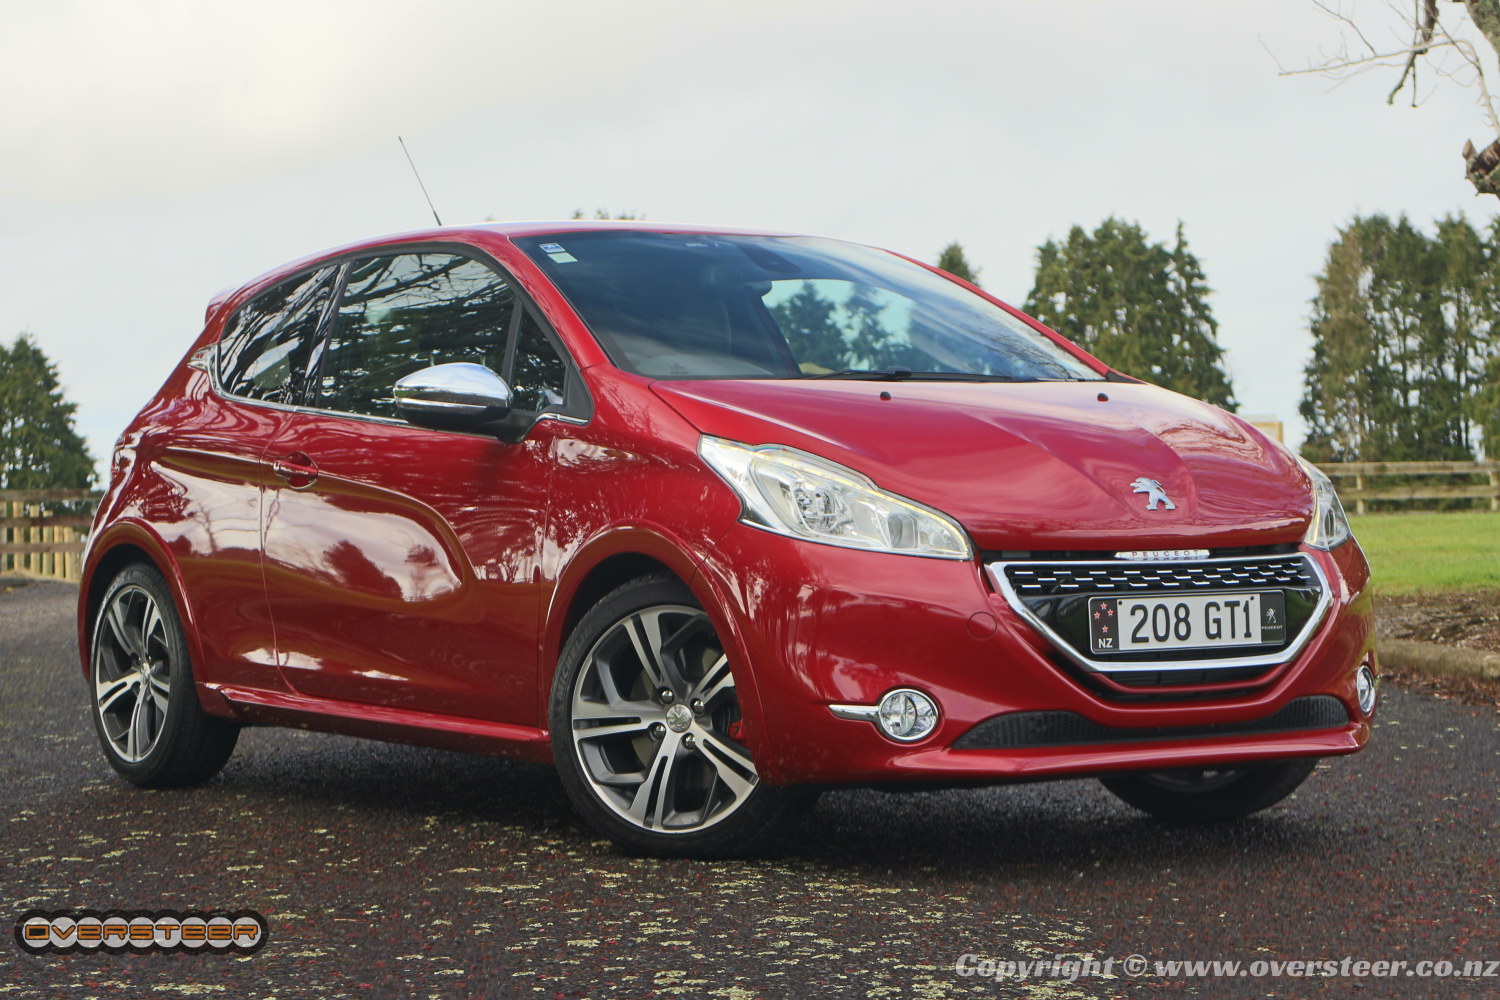 Peugeot 208 XY production version announced